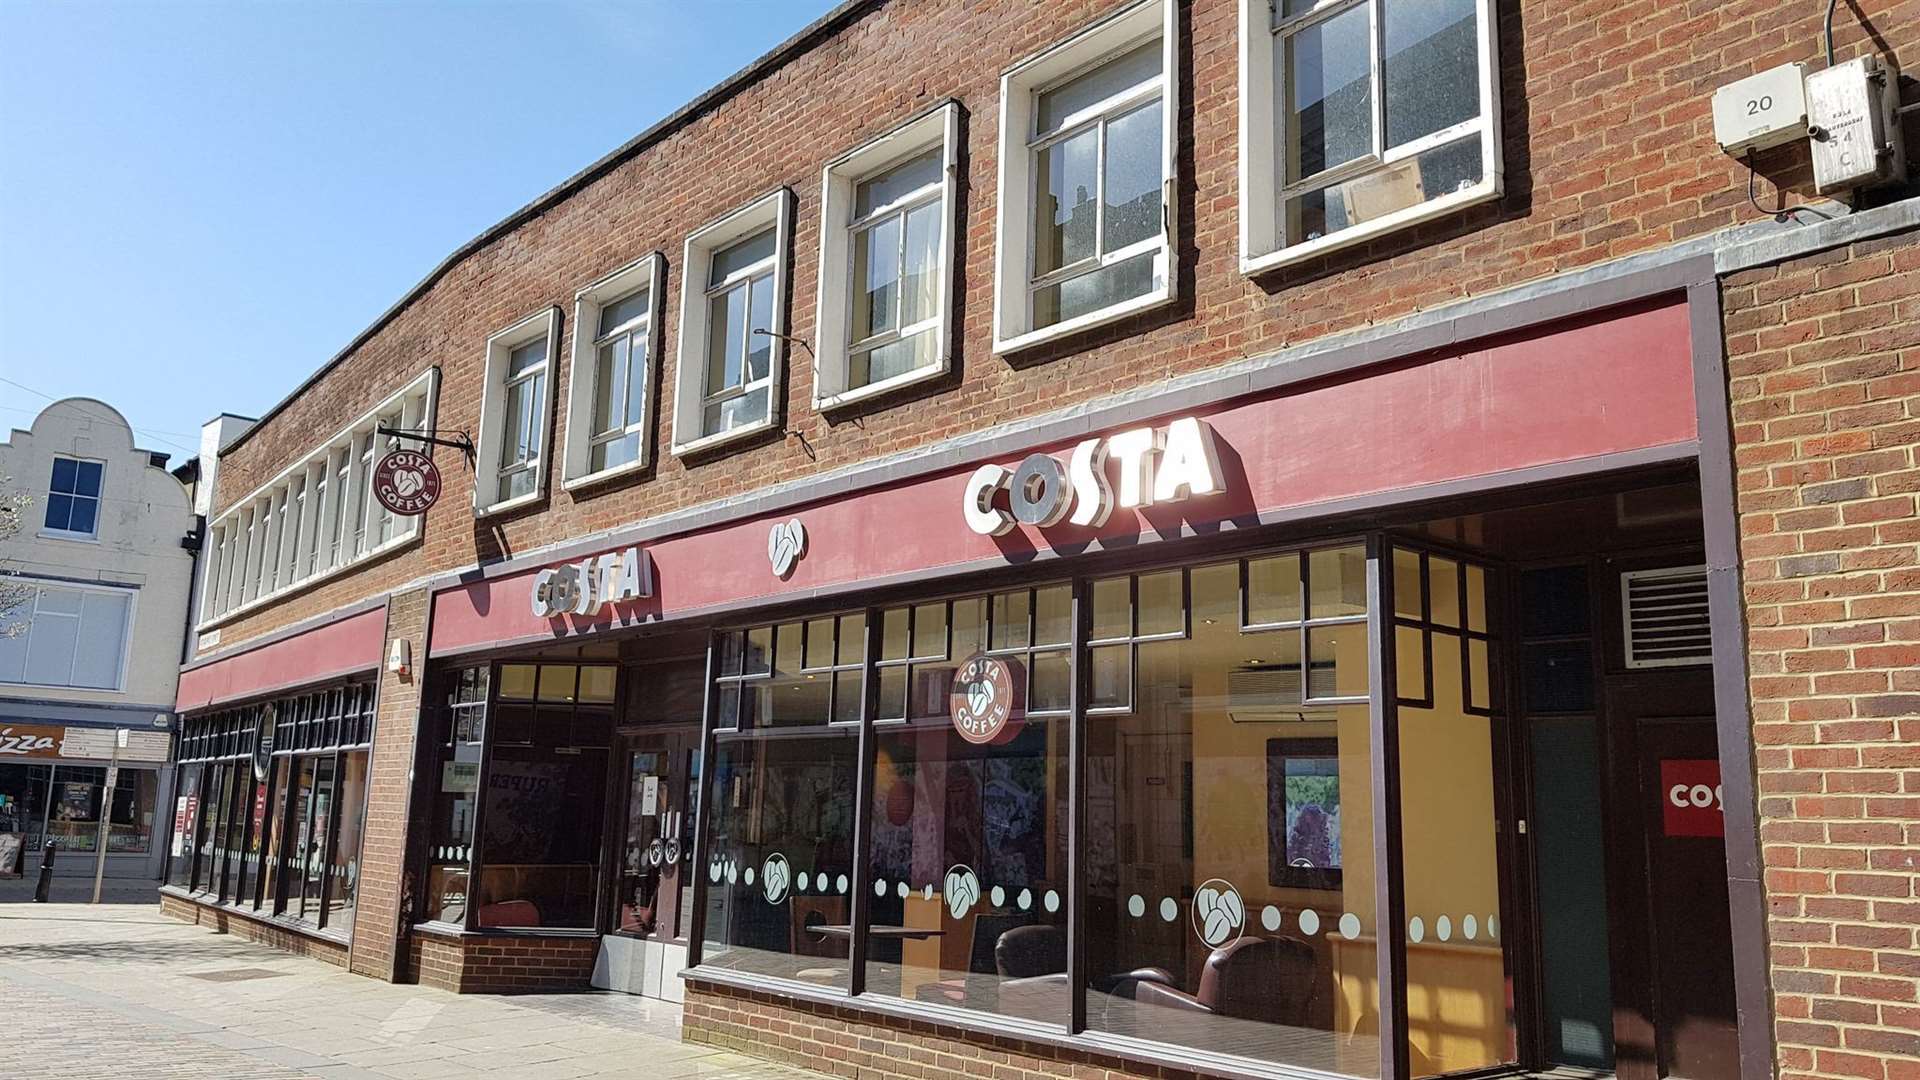 The Costa cafe has been operating since the mid-2000s